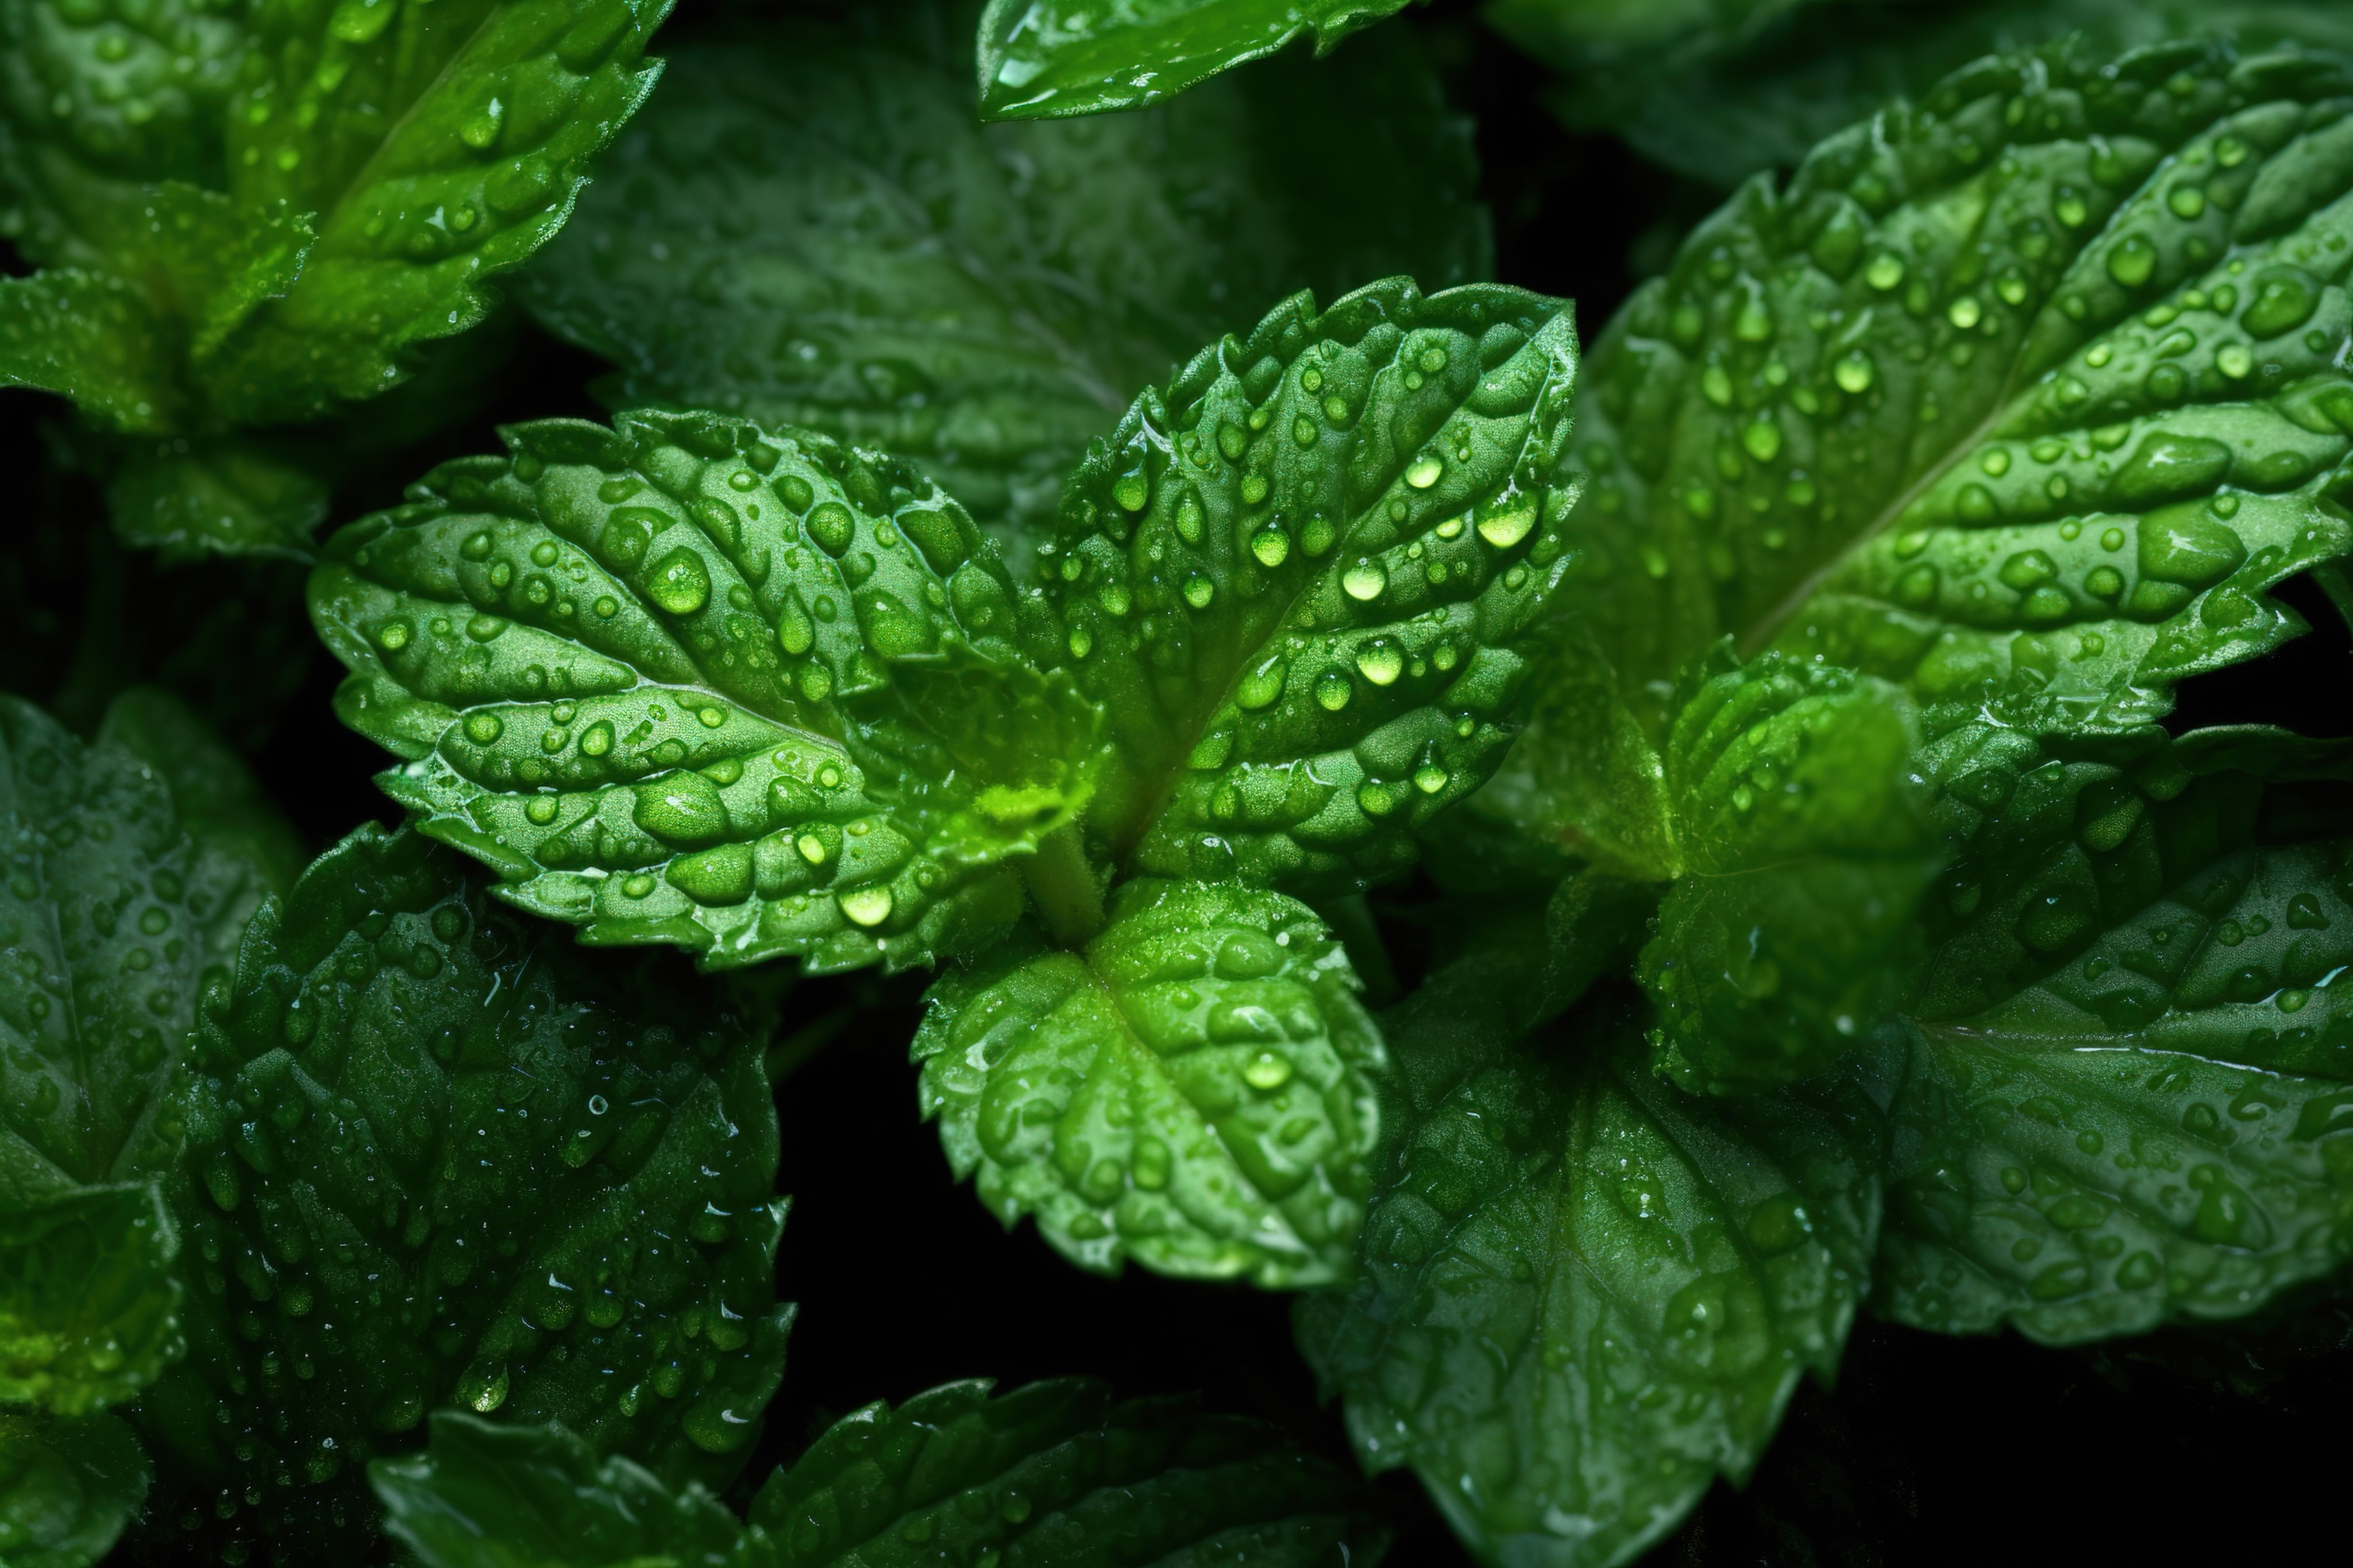 Green leafy plants are covered in water droplets.